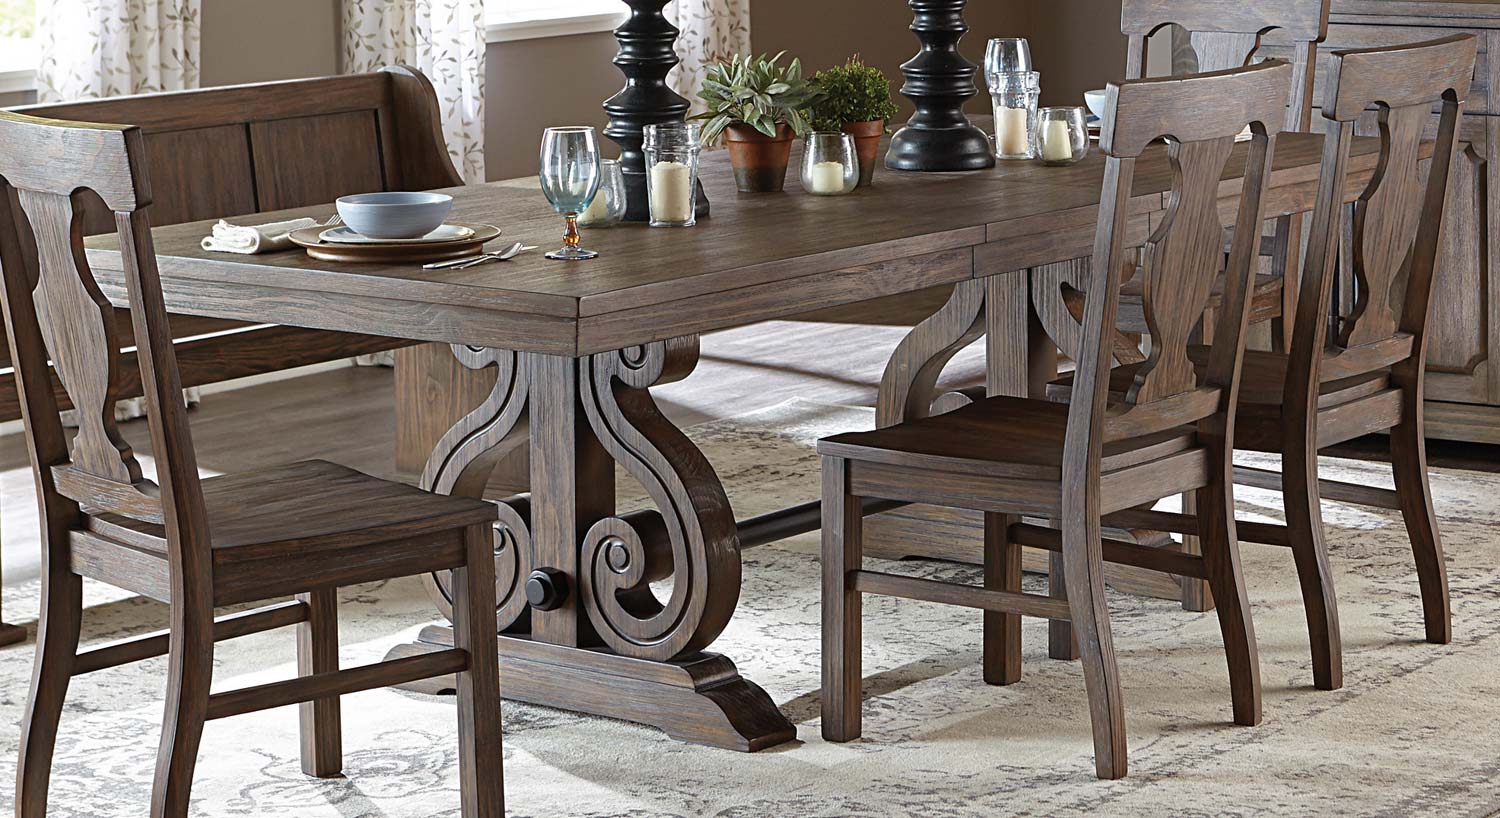 Homelegance Toulon Trestle Dining Table - Wire Brushed